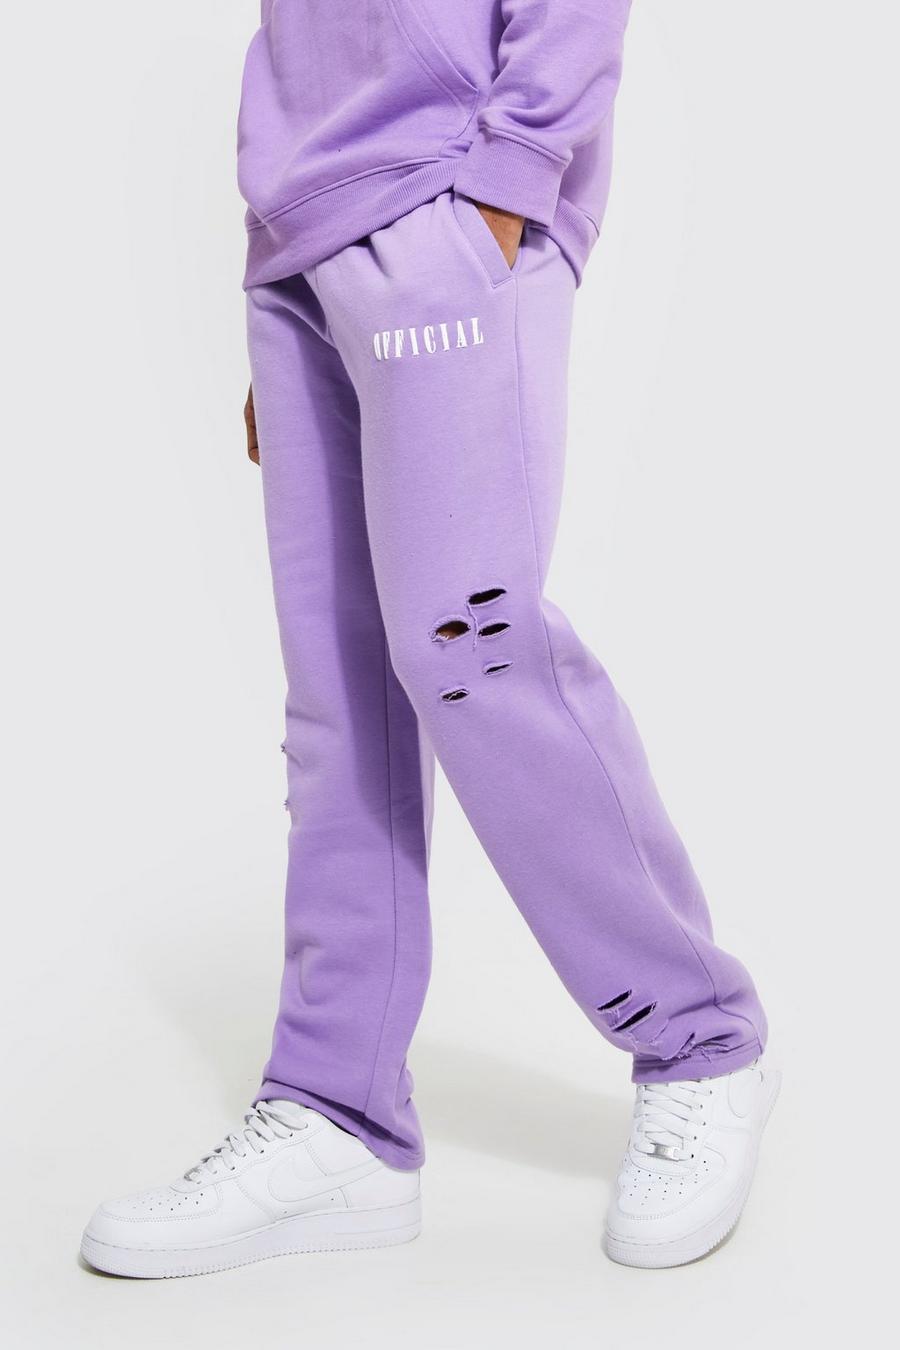 Lilac purple Official Oversized Distressed Wide Leg Jogger